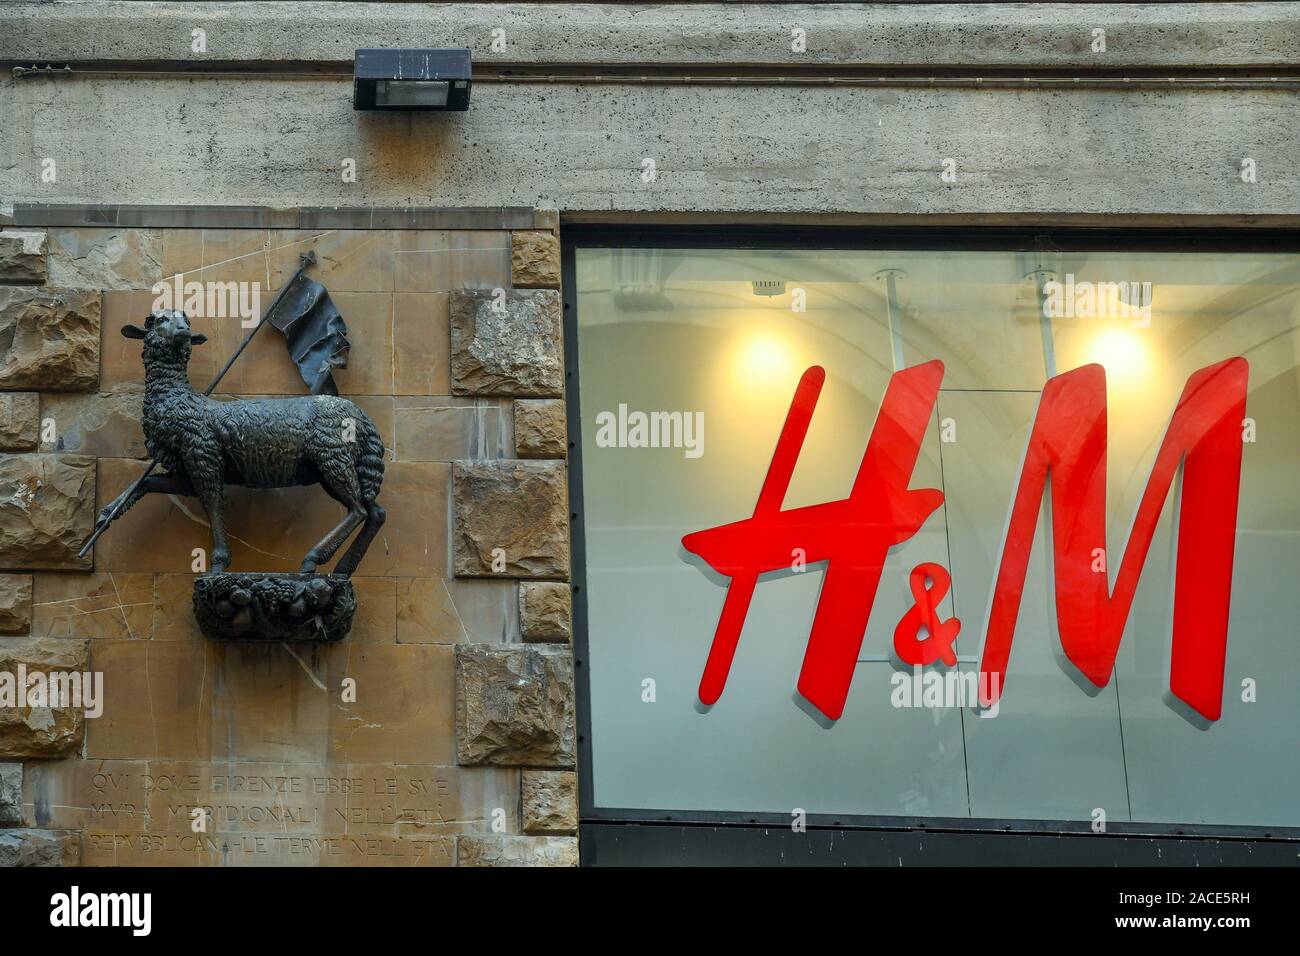 Detail of Palazzo della Borsa Merci with the bronze lamb, symbol of  Arte della Lana, next to the shop sign of H&M department store, Florence, Italy Stock Photo